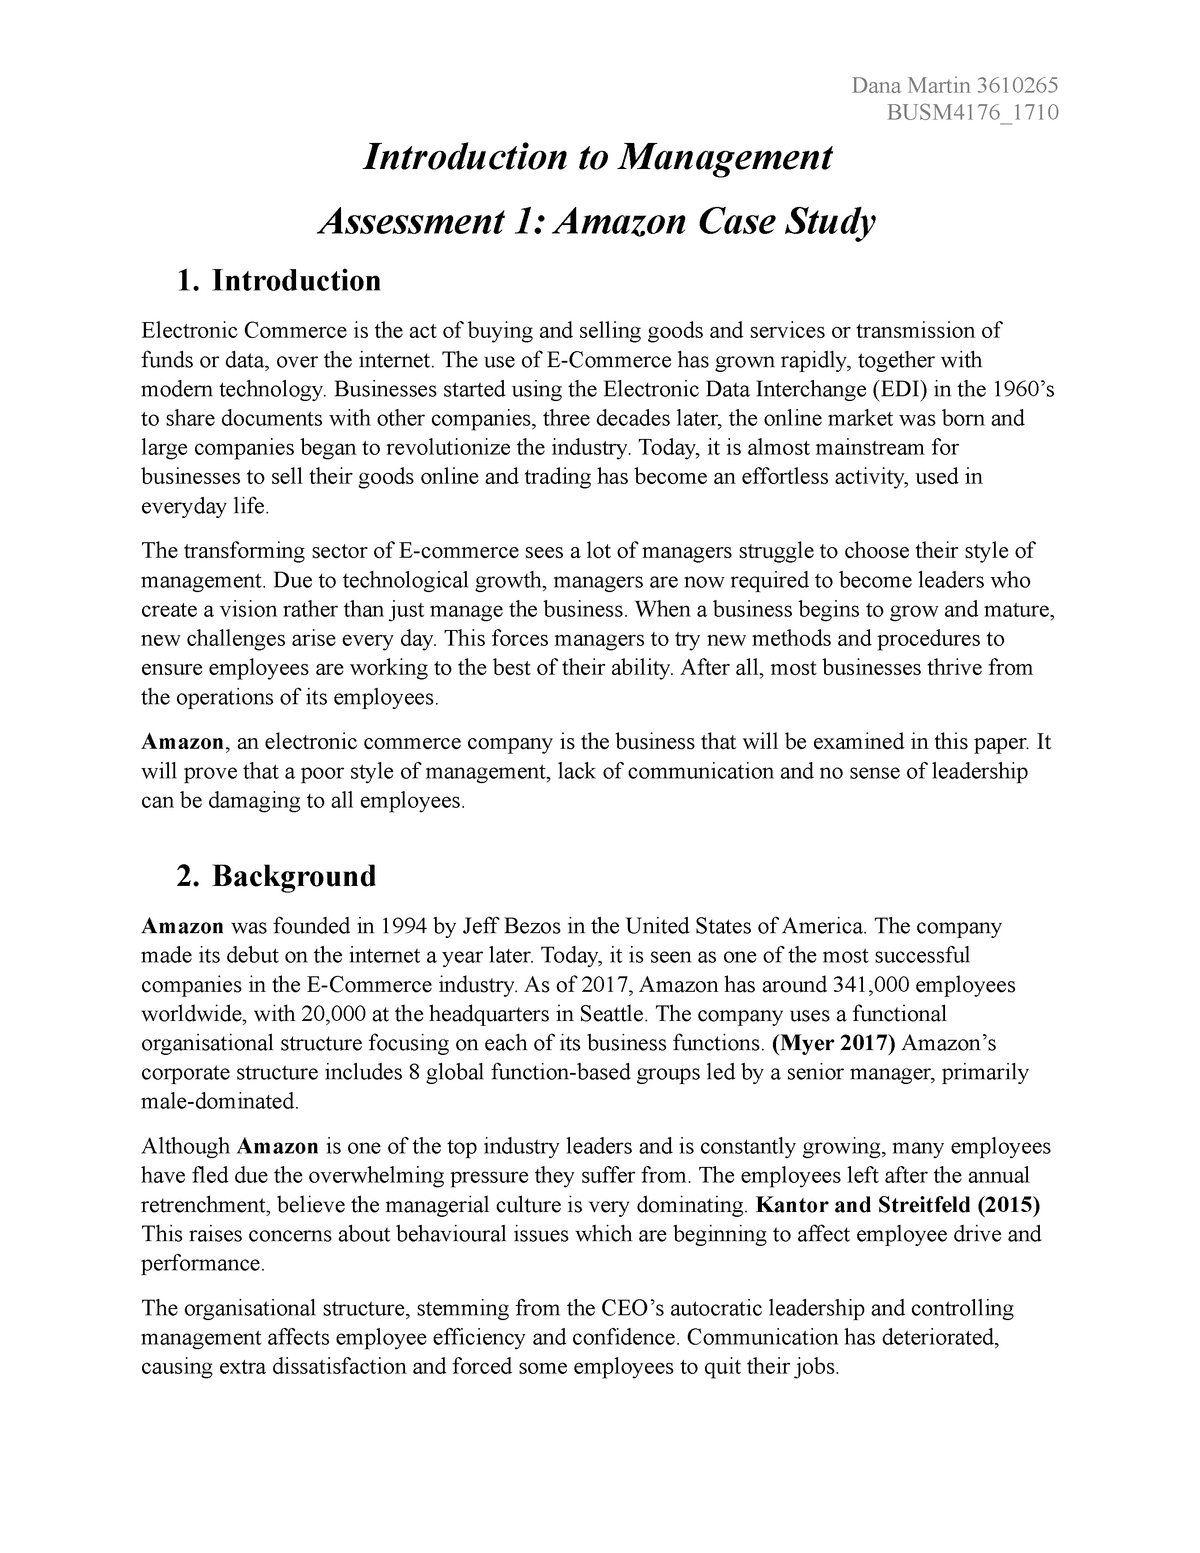 case study on introduction to management